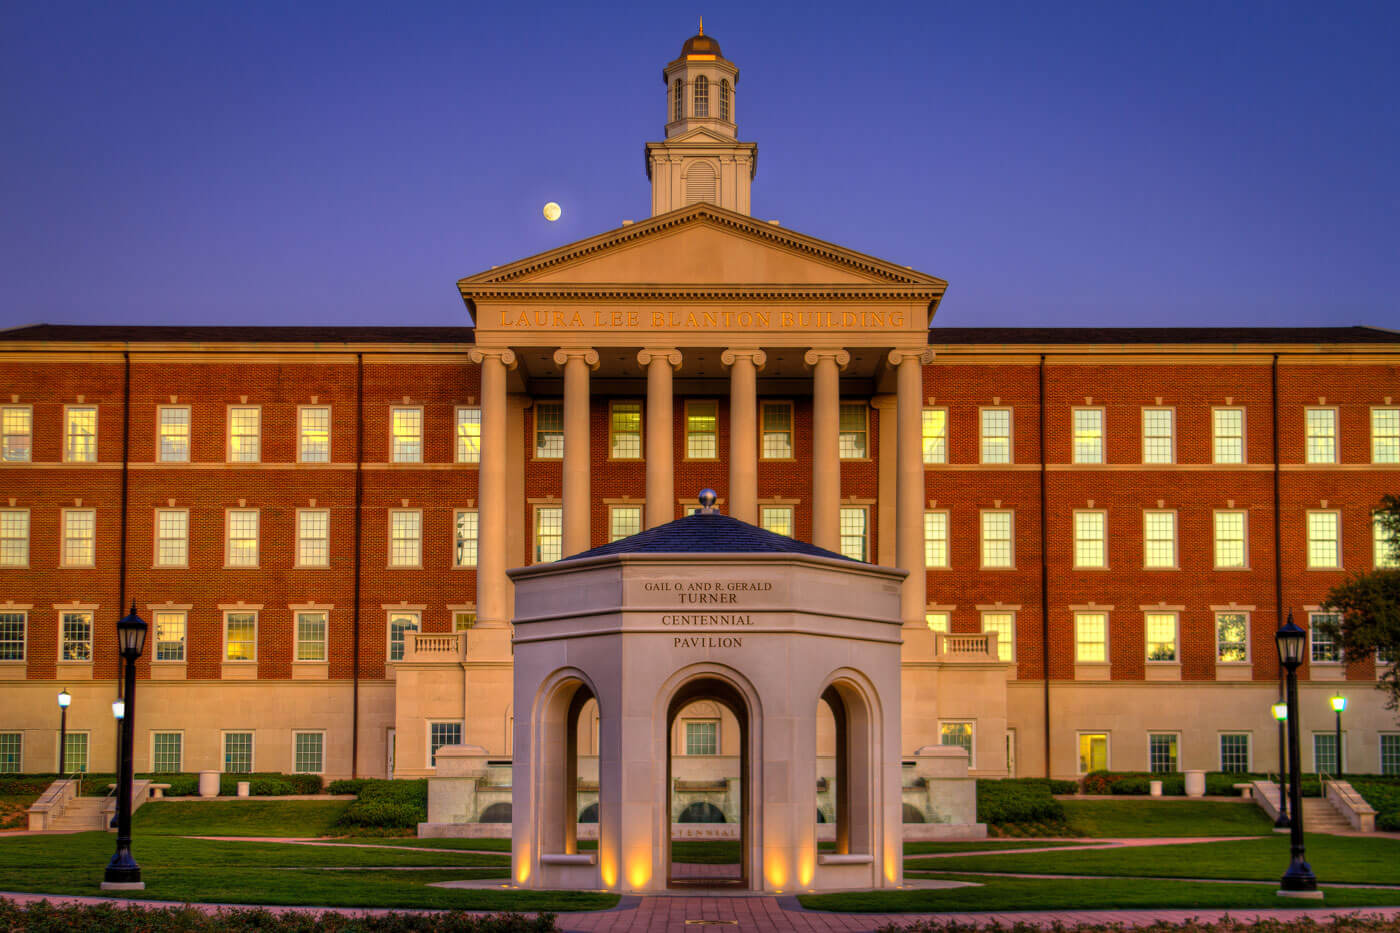 The Gail O. and R. Gerald Turner Centennial Pavilion sits proudly in front of the Laura Lee Blanton Building on the SMU campus with the moon rising in the background.